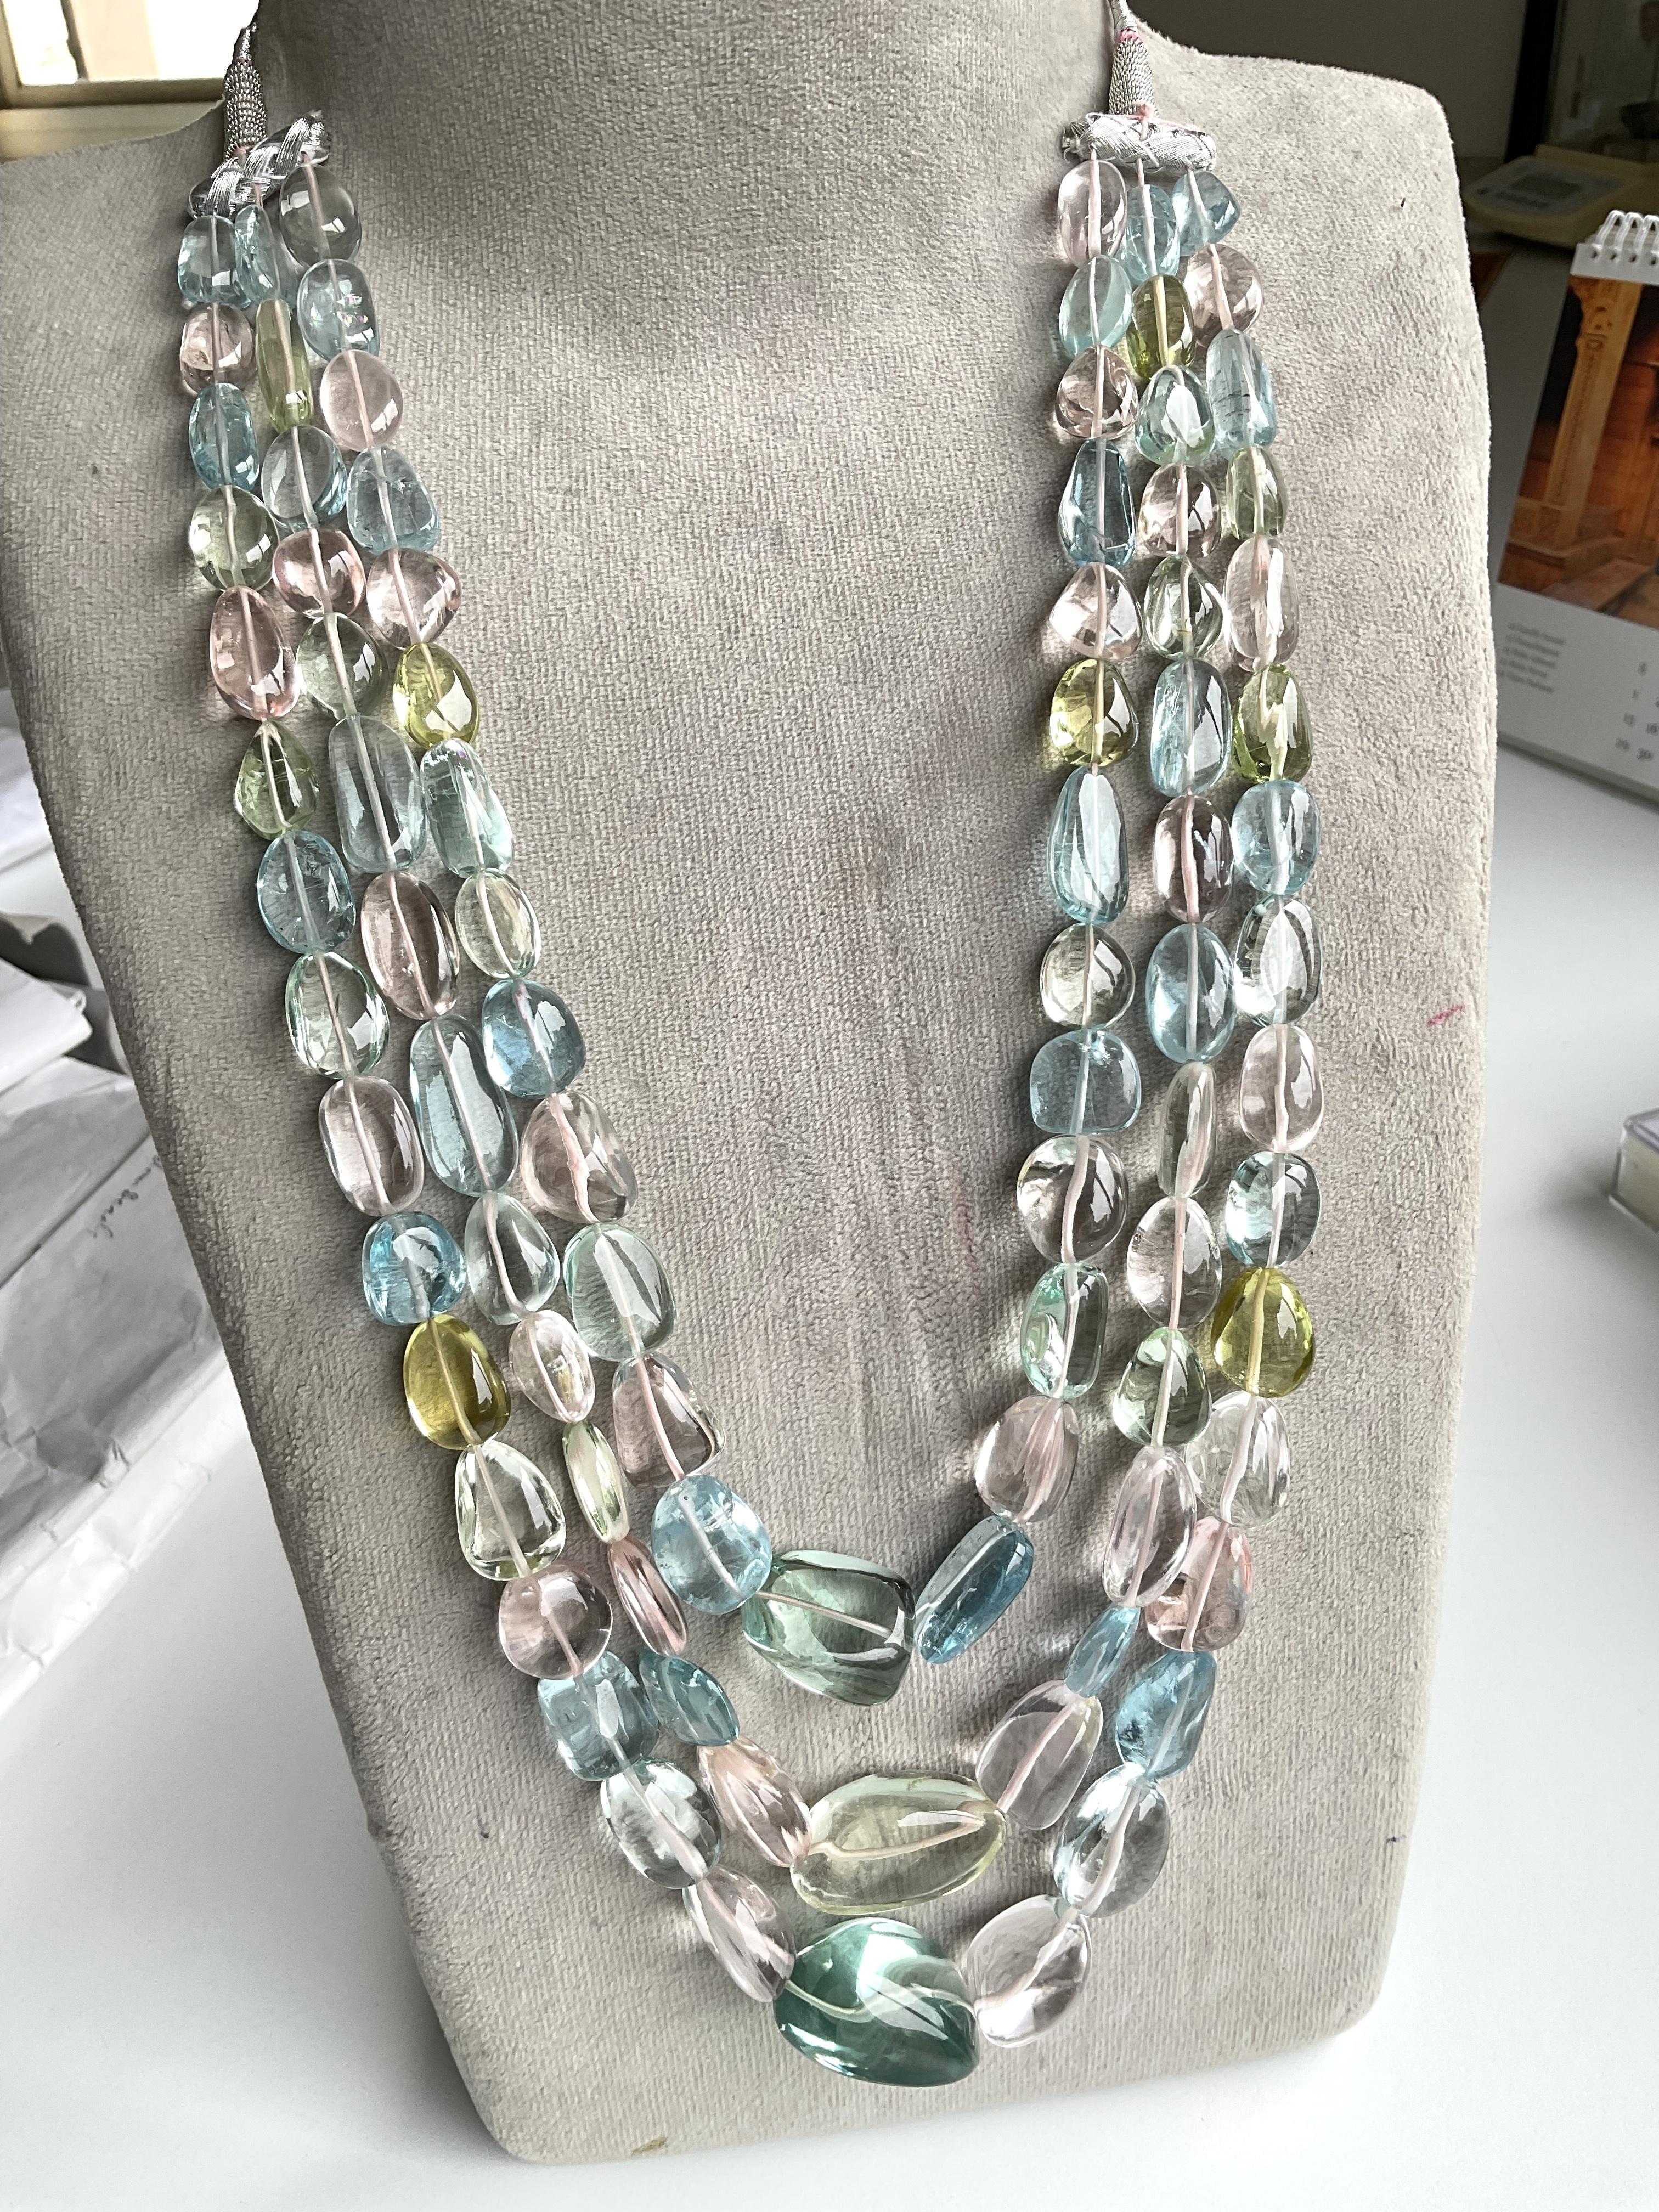  Tumbled Plain Necklace For Fine Jewelry Gem
Gemstone - Aquamarine
morganite
heliodor
Variety of Beryl Gems
Weight: 1362.55 Carats
Size: 9x13 To 24x31 MM
Strands - 3
